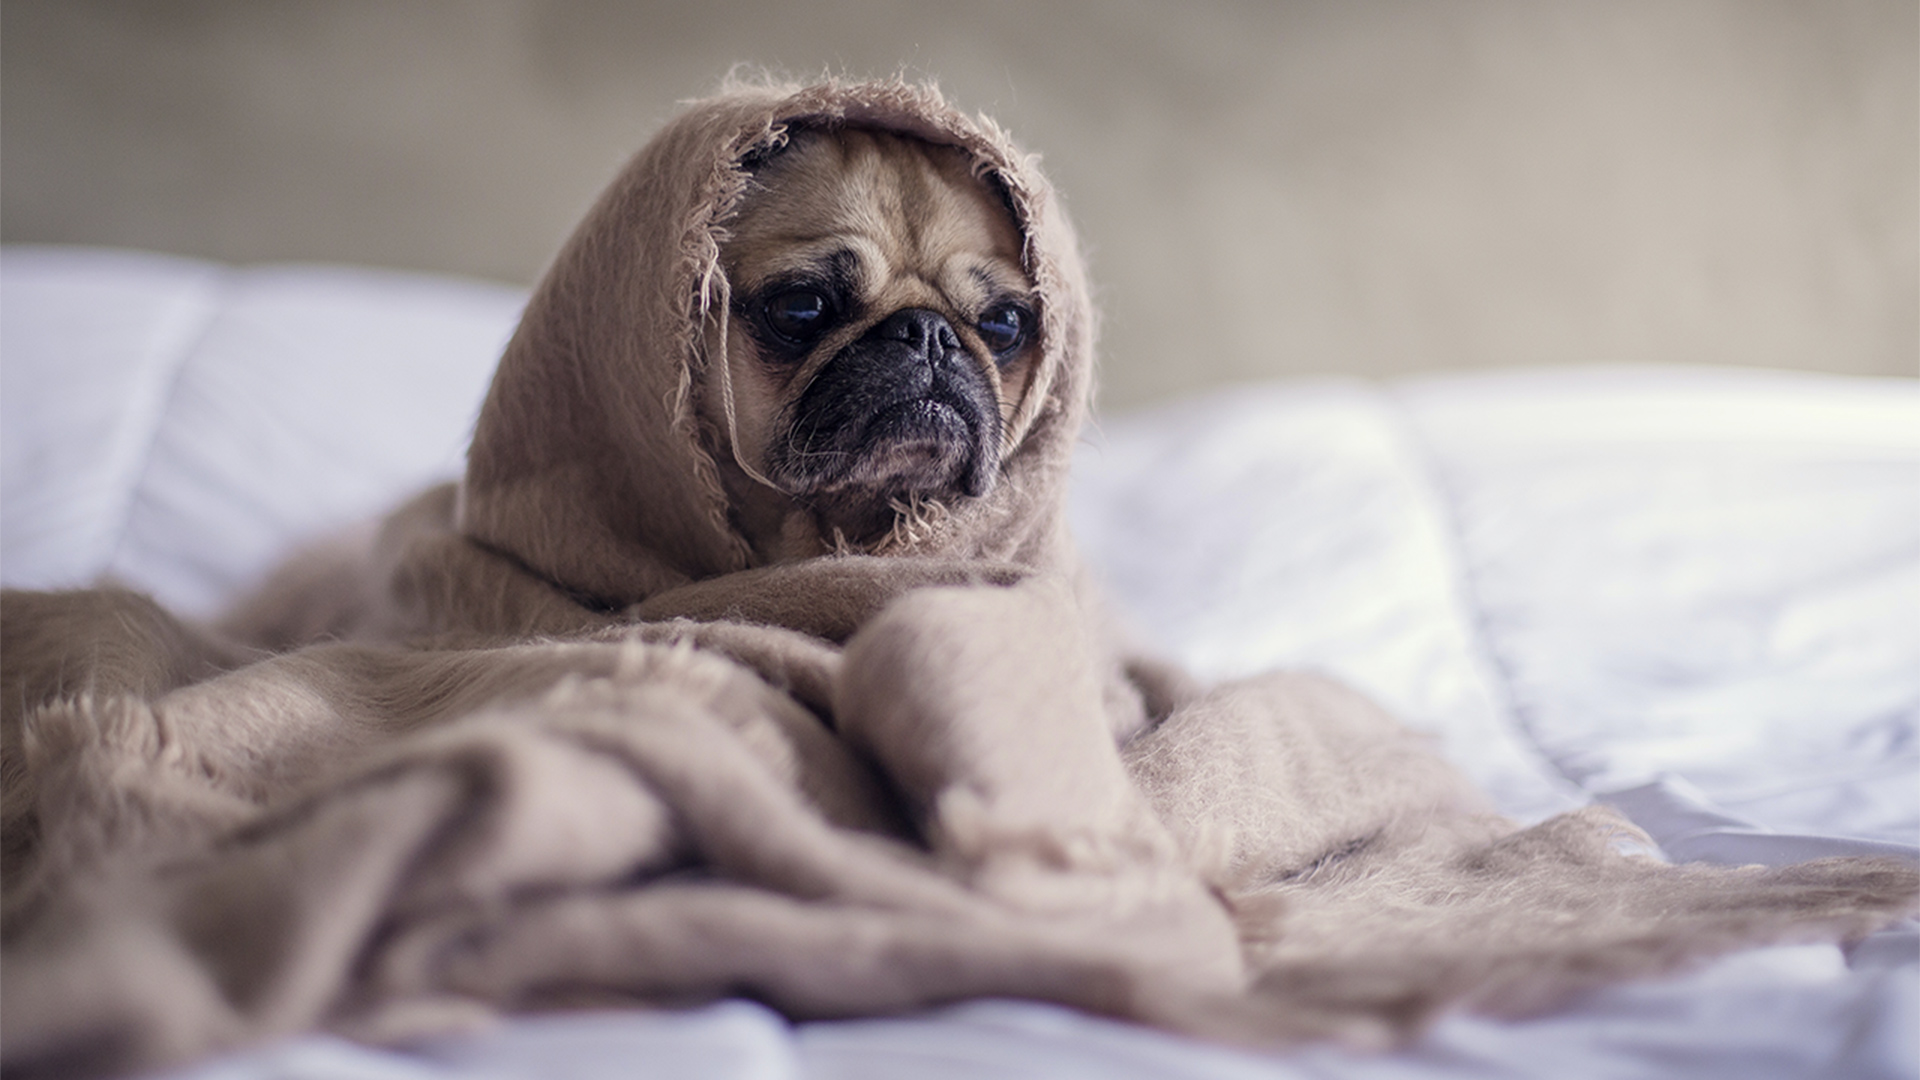 Sad pug covered with a blanket